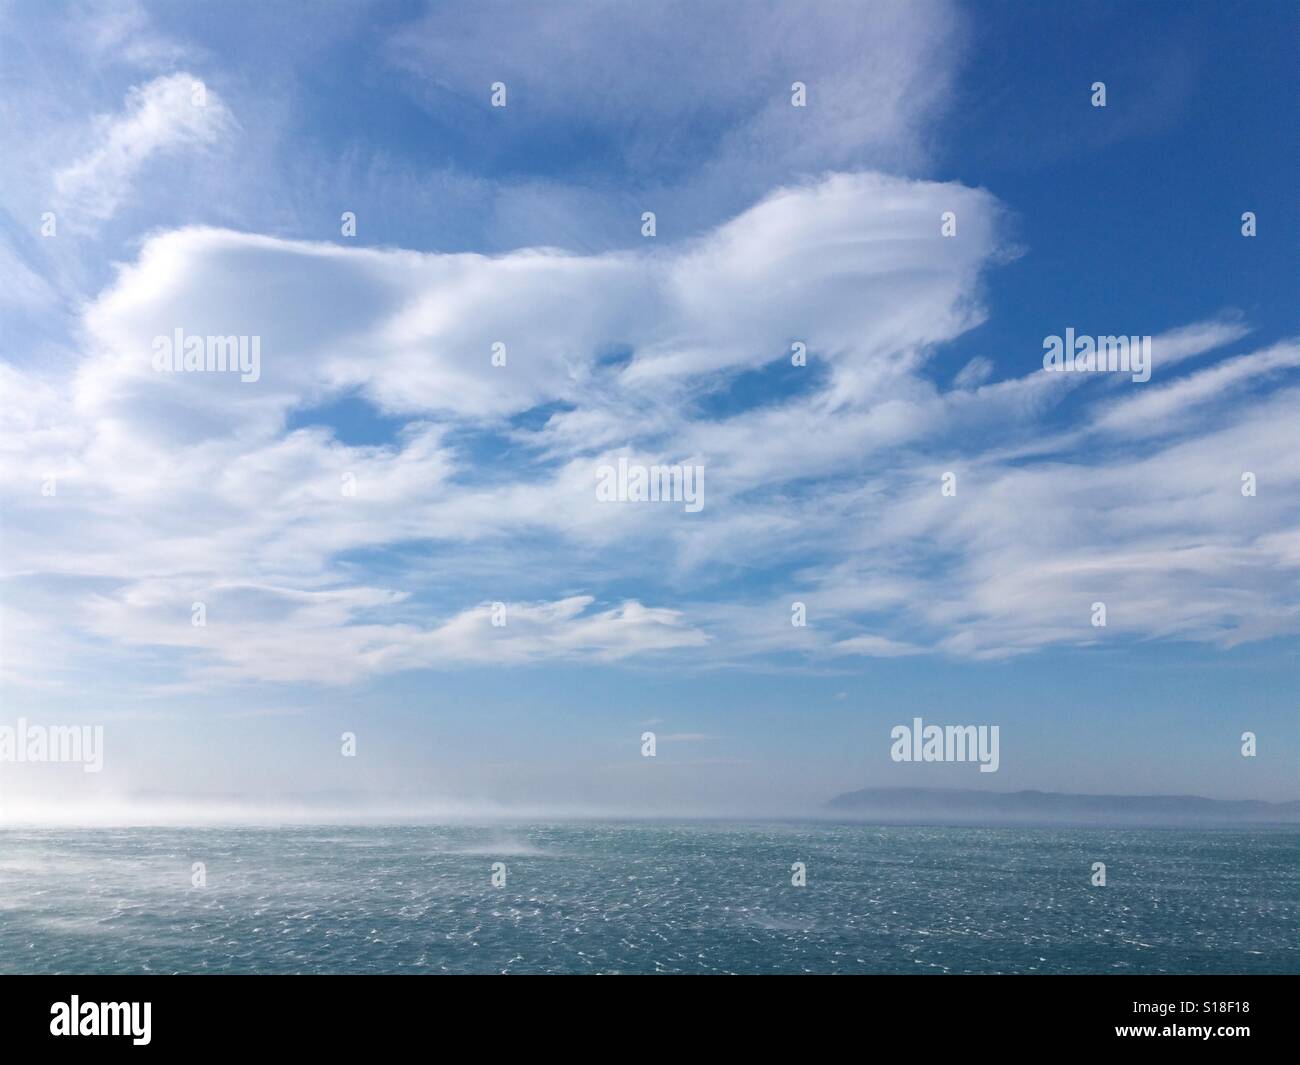 Strong wind blowing over blue sea Stock Photo - Alamy